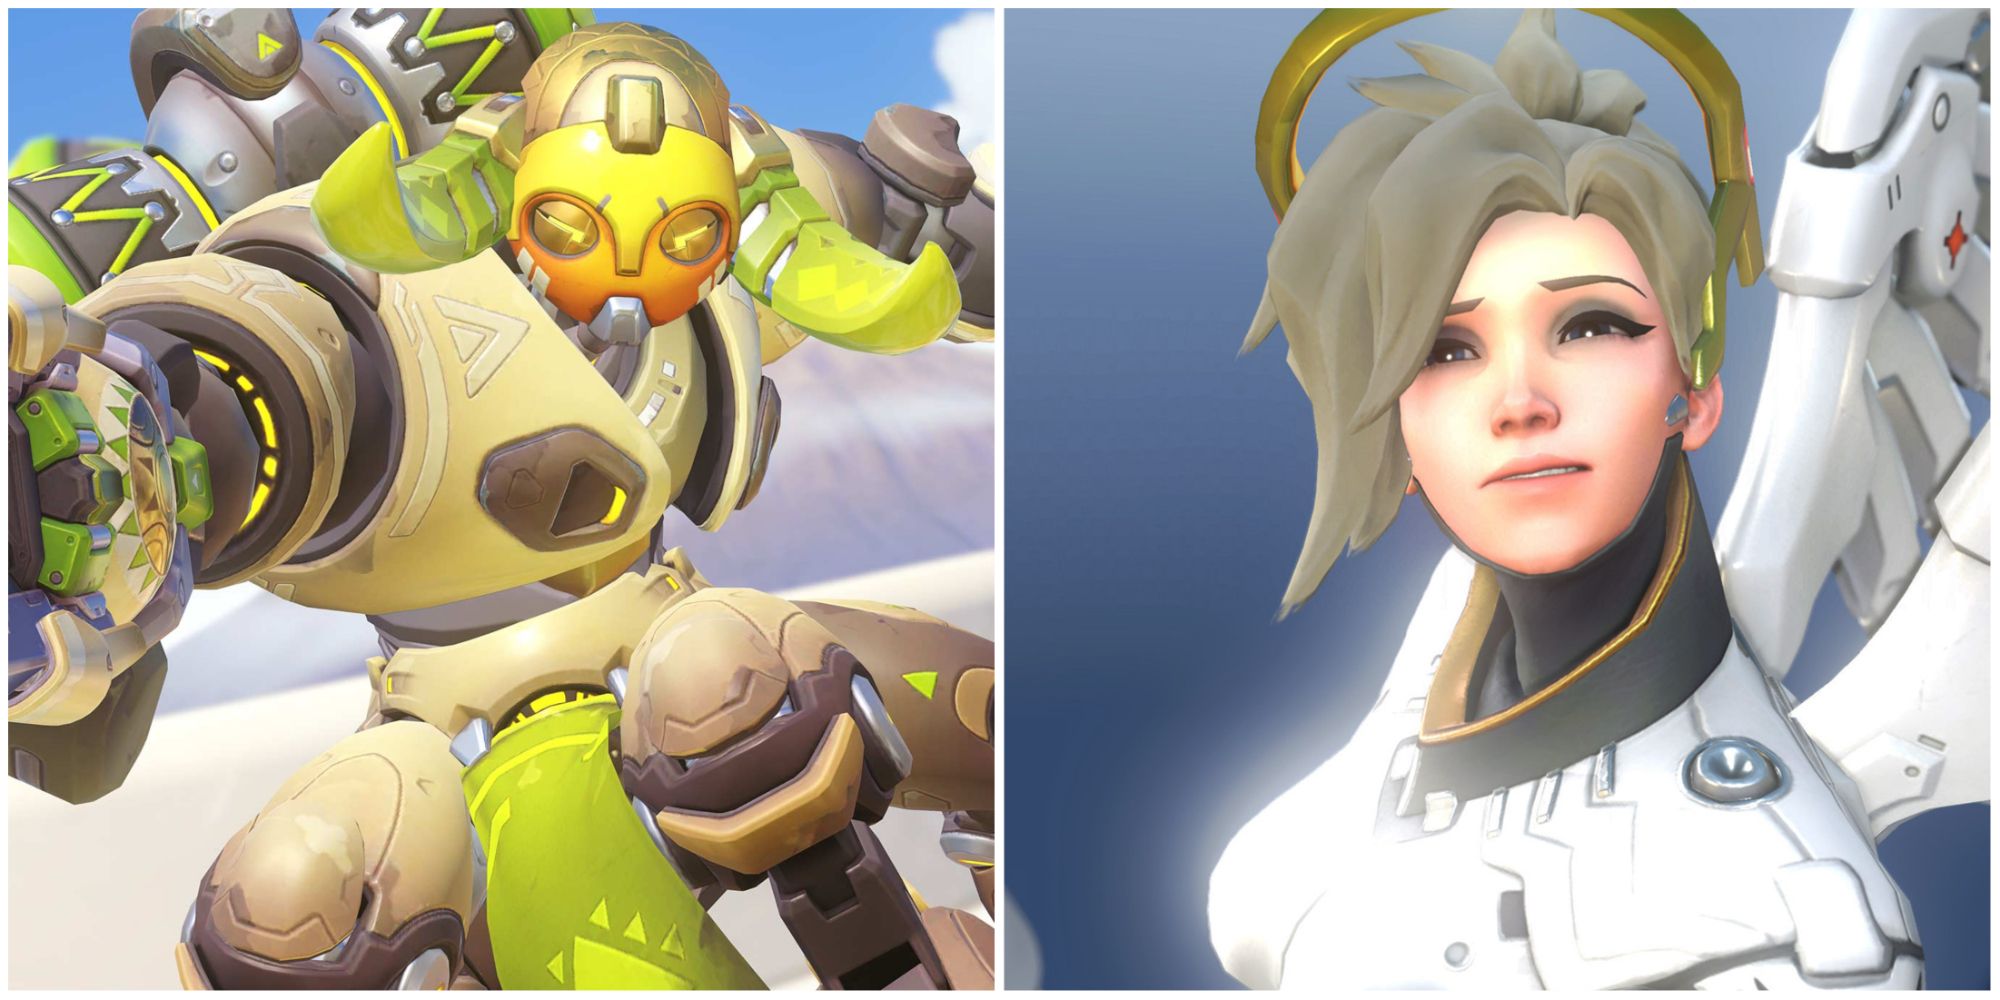 orisa and mercy next to each other